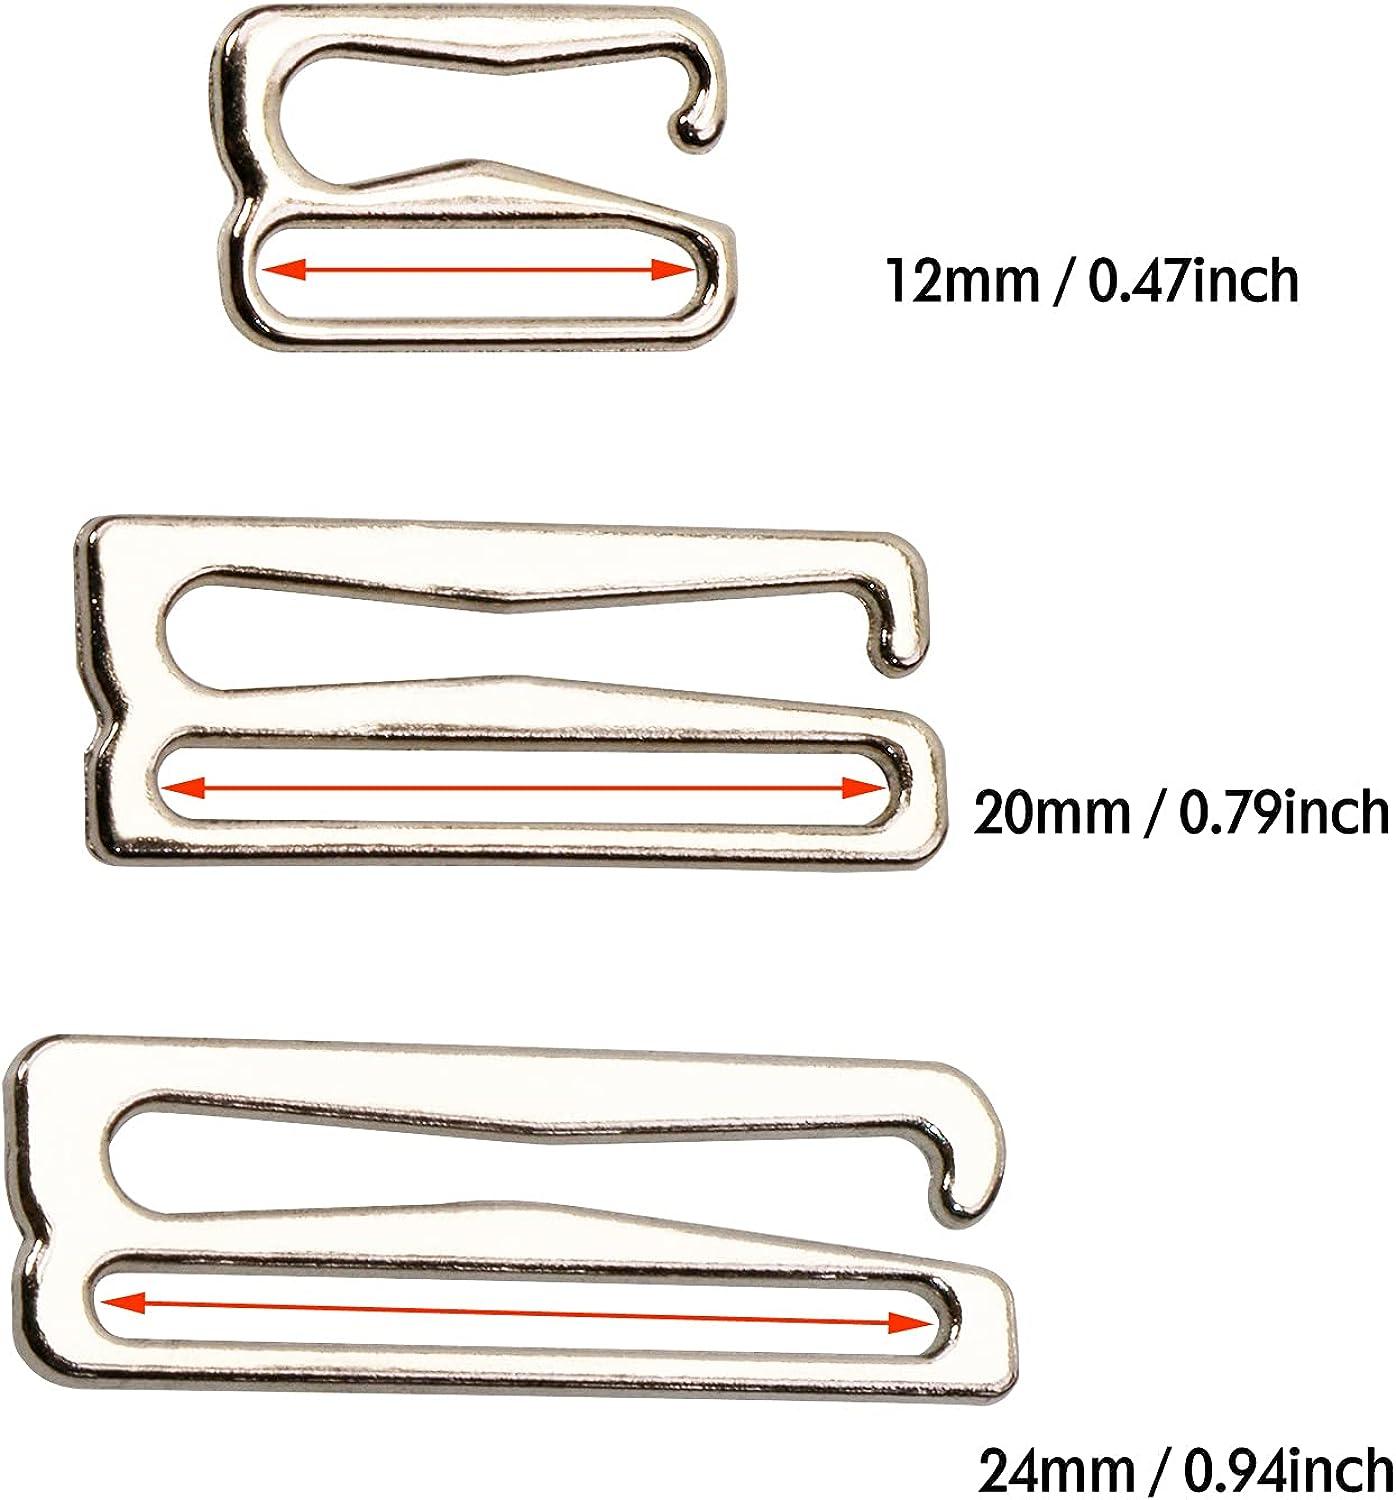 Tupalizy 2 Sizes Metal Swimsuit Bra Hooks Replacement for Sewing Bikini  Halter Swimsuit Tops BathingÂ SuitÂ Clips Clasp